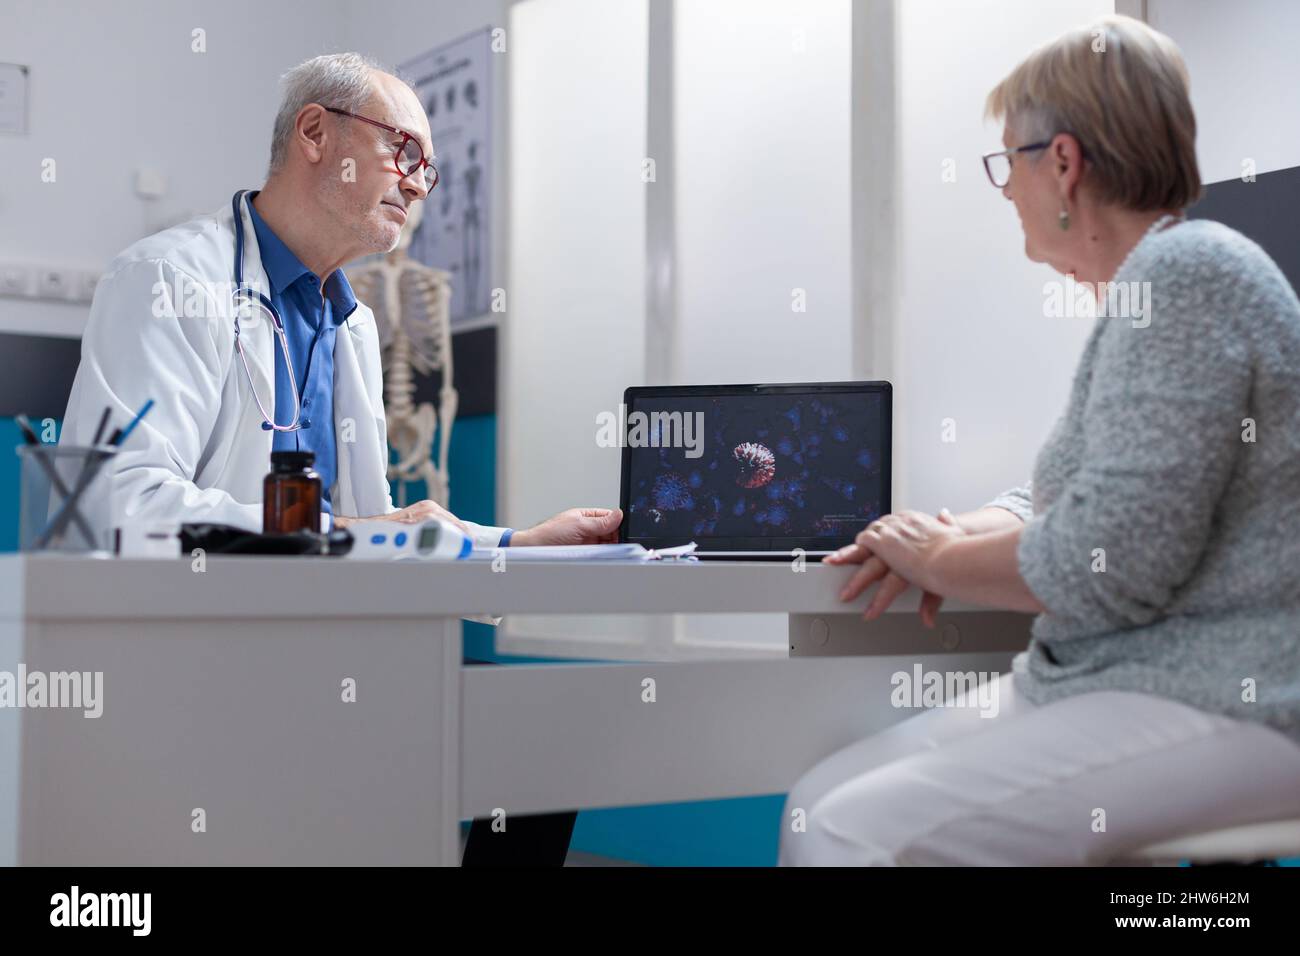 Medic showing coronavirus bacteria illustration on laptop to patient in cabinet. Medical specialist and patient looking at computer screen with visual representation of covid 19 pandemic. Stock Photo